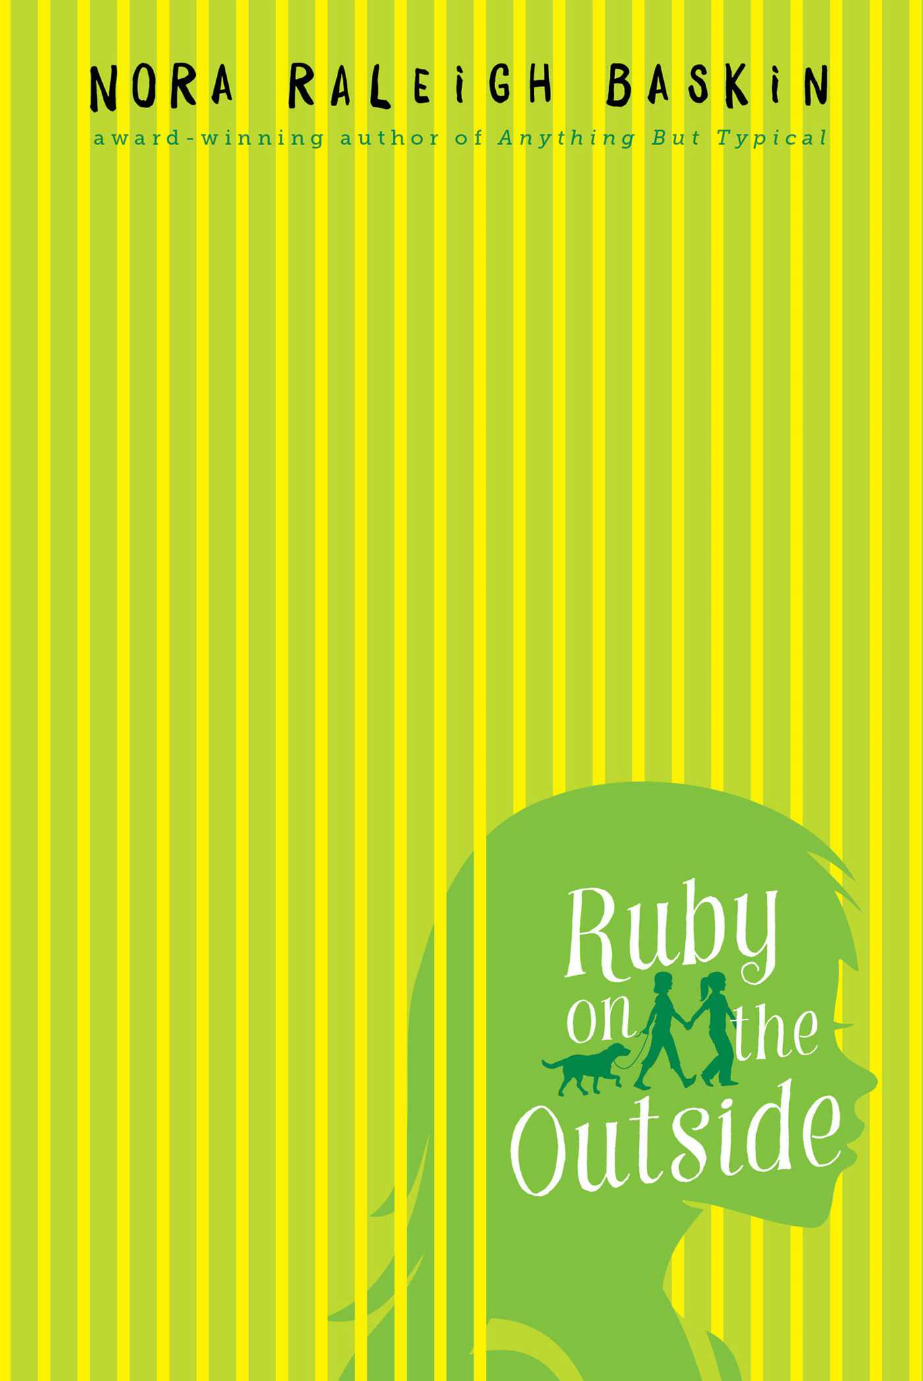 //www.norabaskin.com/wp-content/uploads/2018/04/ruby-on-the-outside.png